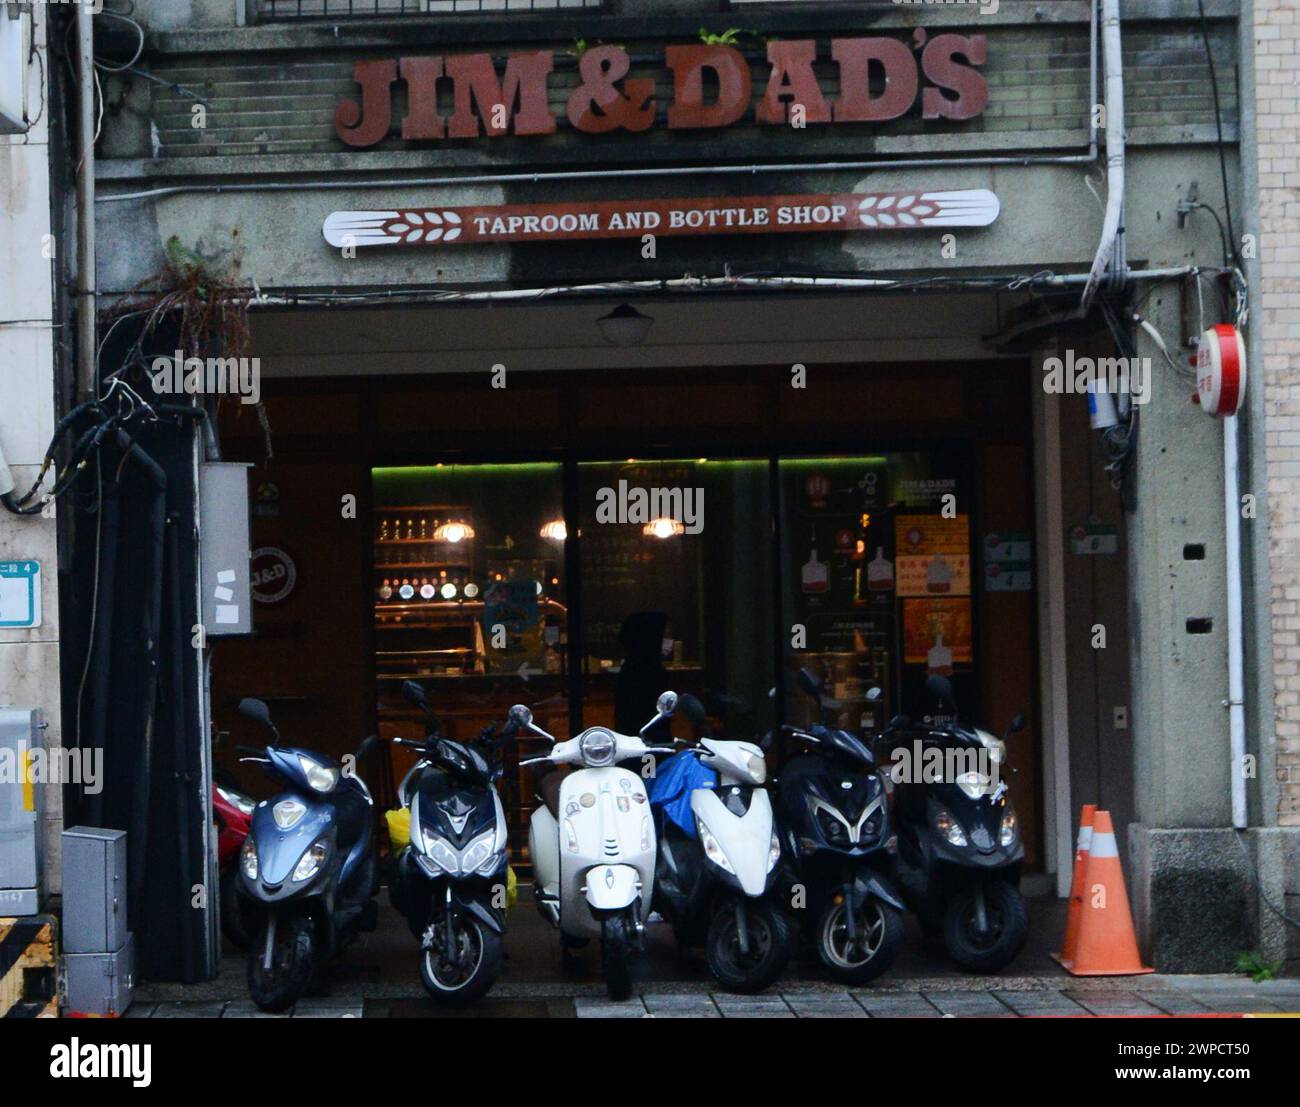 Jim & Papa's taproom à Taipei, Taiwan. Banque D'Images